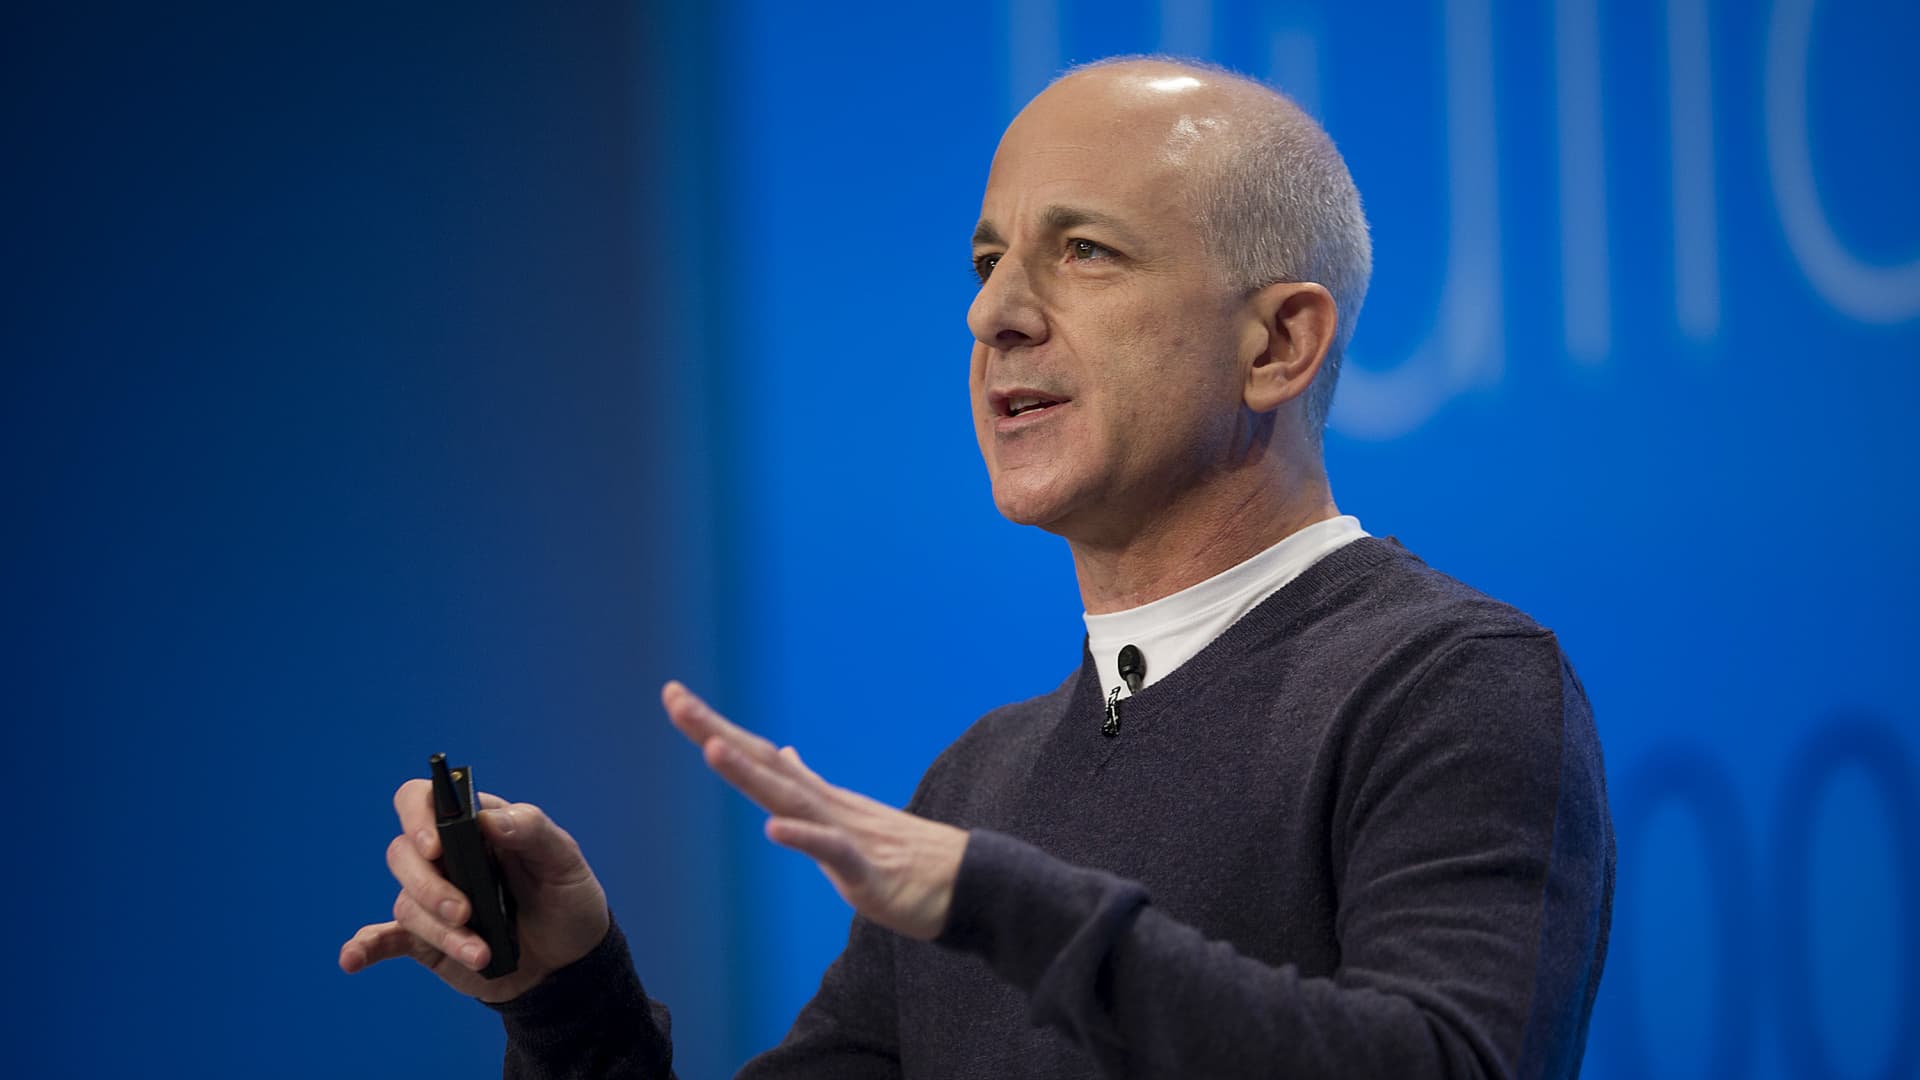 Steven Sinofsky, then president of the Windows group at Microsoft Corp., speaks during an event in New York, U.S., on Thursday, Oct. 25, 2012.